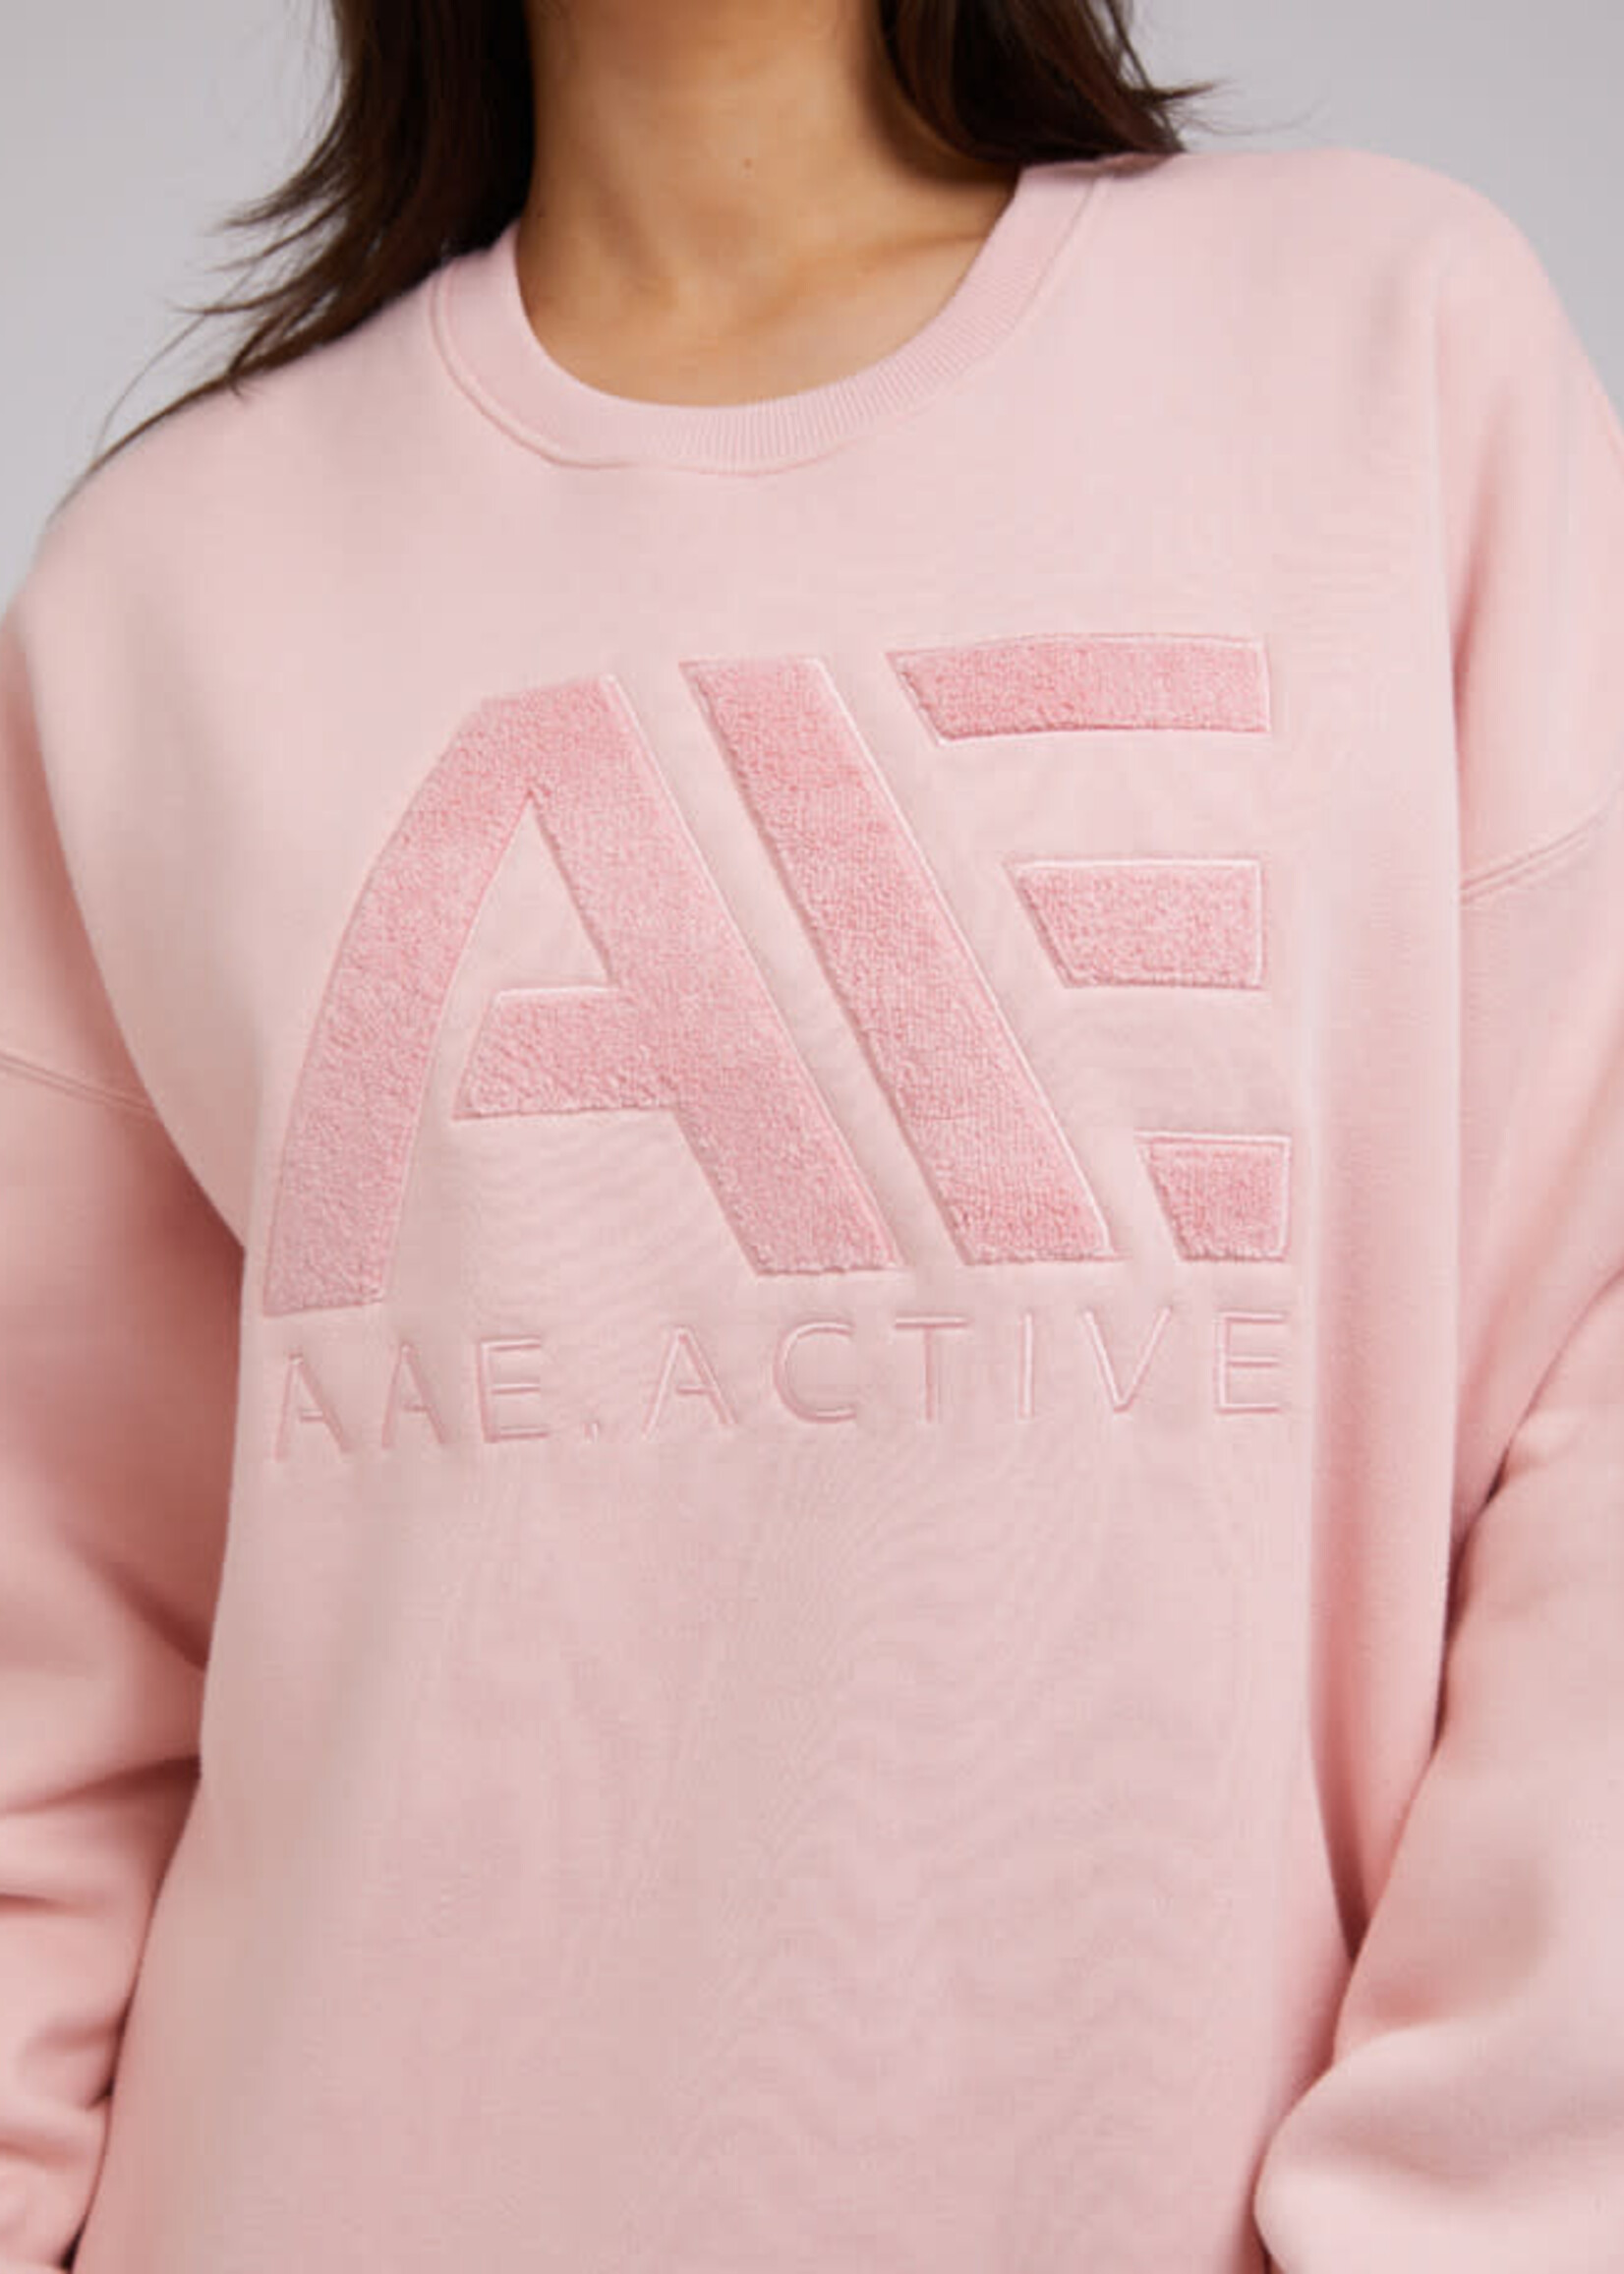 All About Eve Base Active Crew